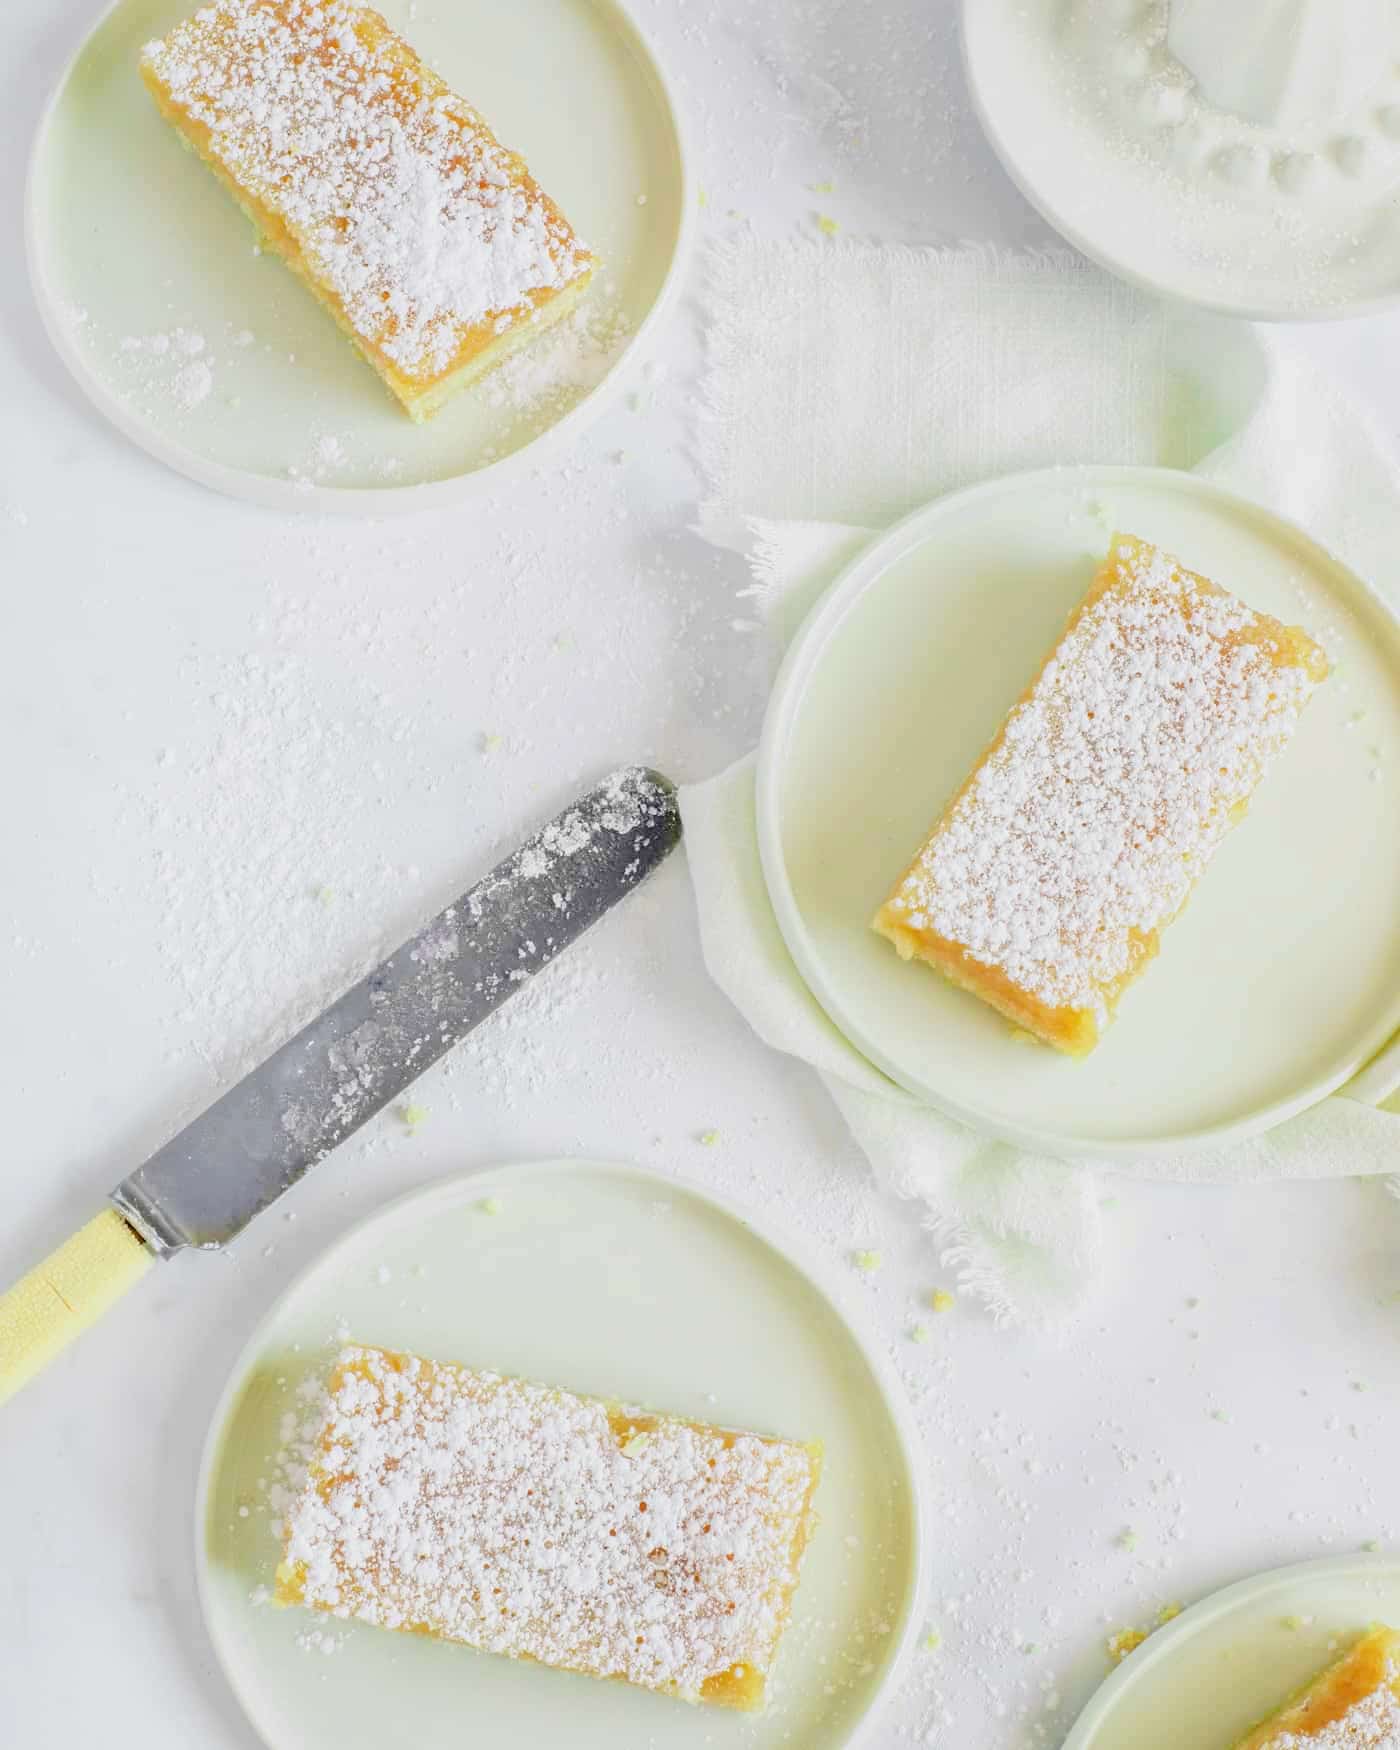 sliced lemon bars on small white lipped plates on a white work surface dusted with icing sugar. A yellow handled butter knife lies at an angle in the middle of the scene and a lemon juicer is at the top